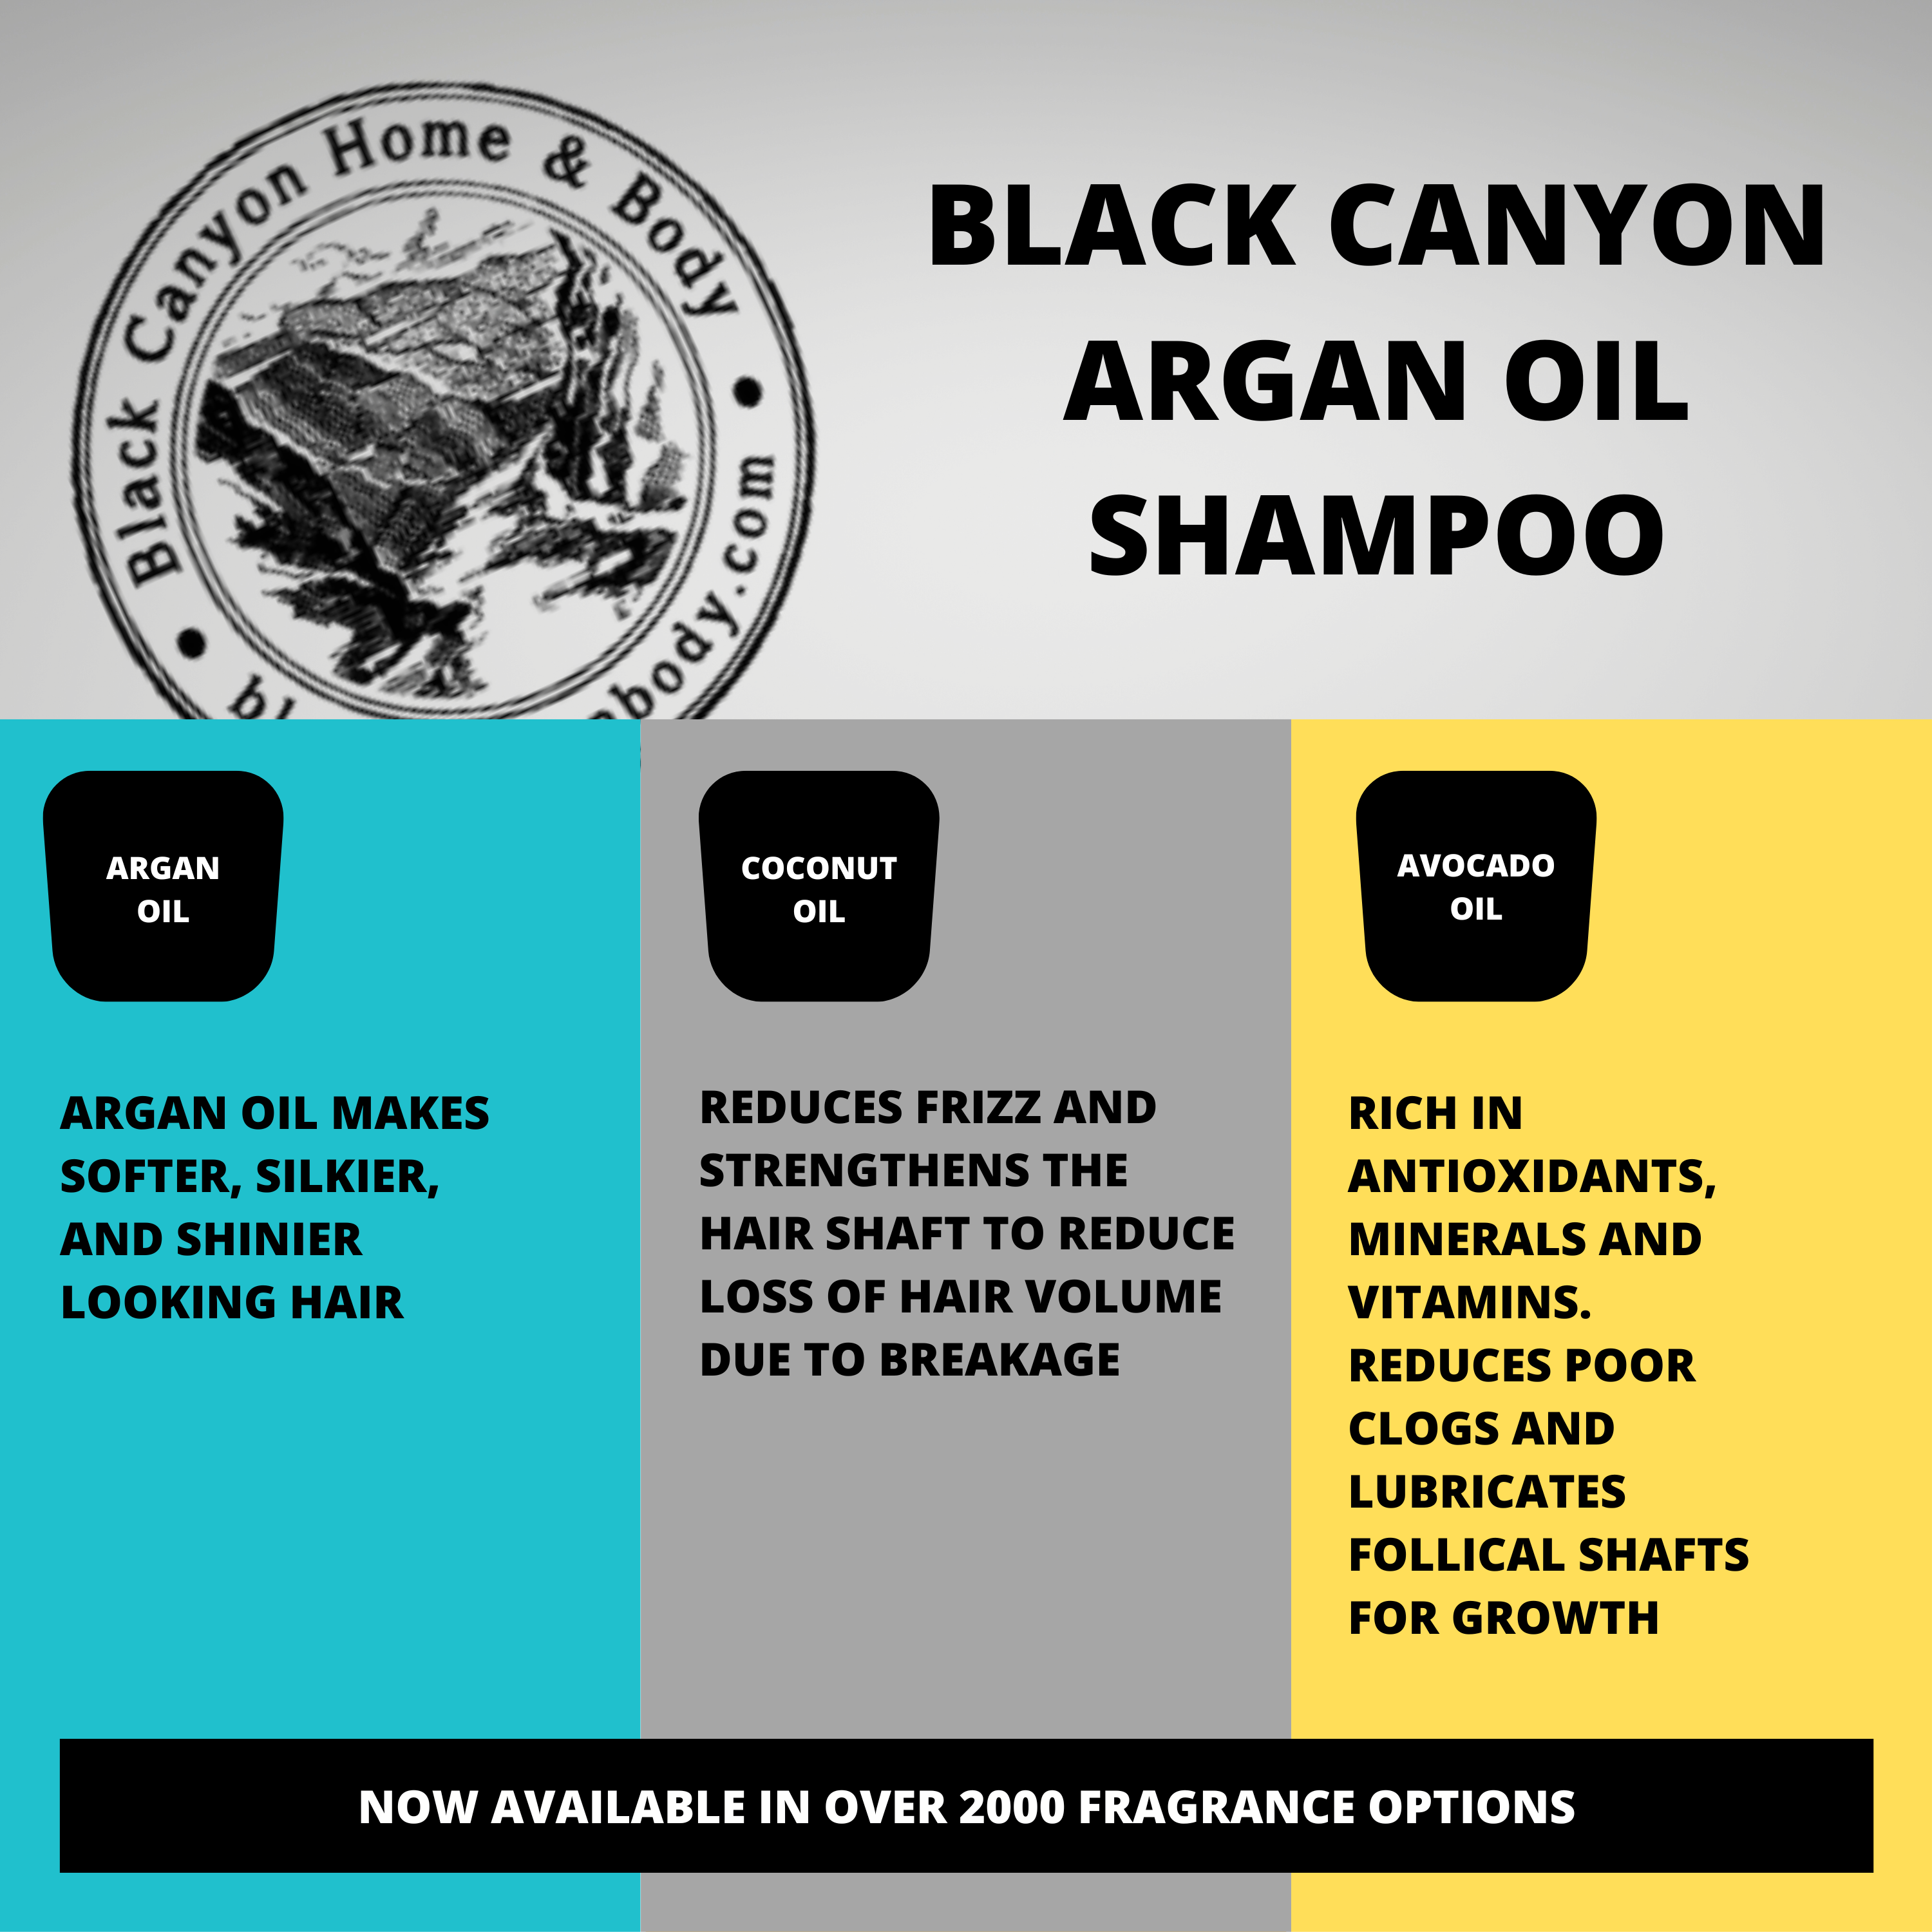 Black Canyon Lemon & Sugared Rose Scented Shampoo with Argan Oil